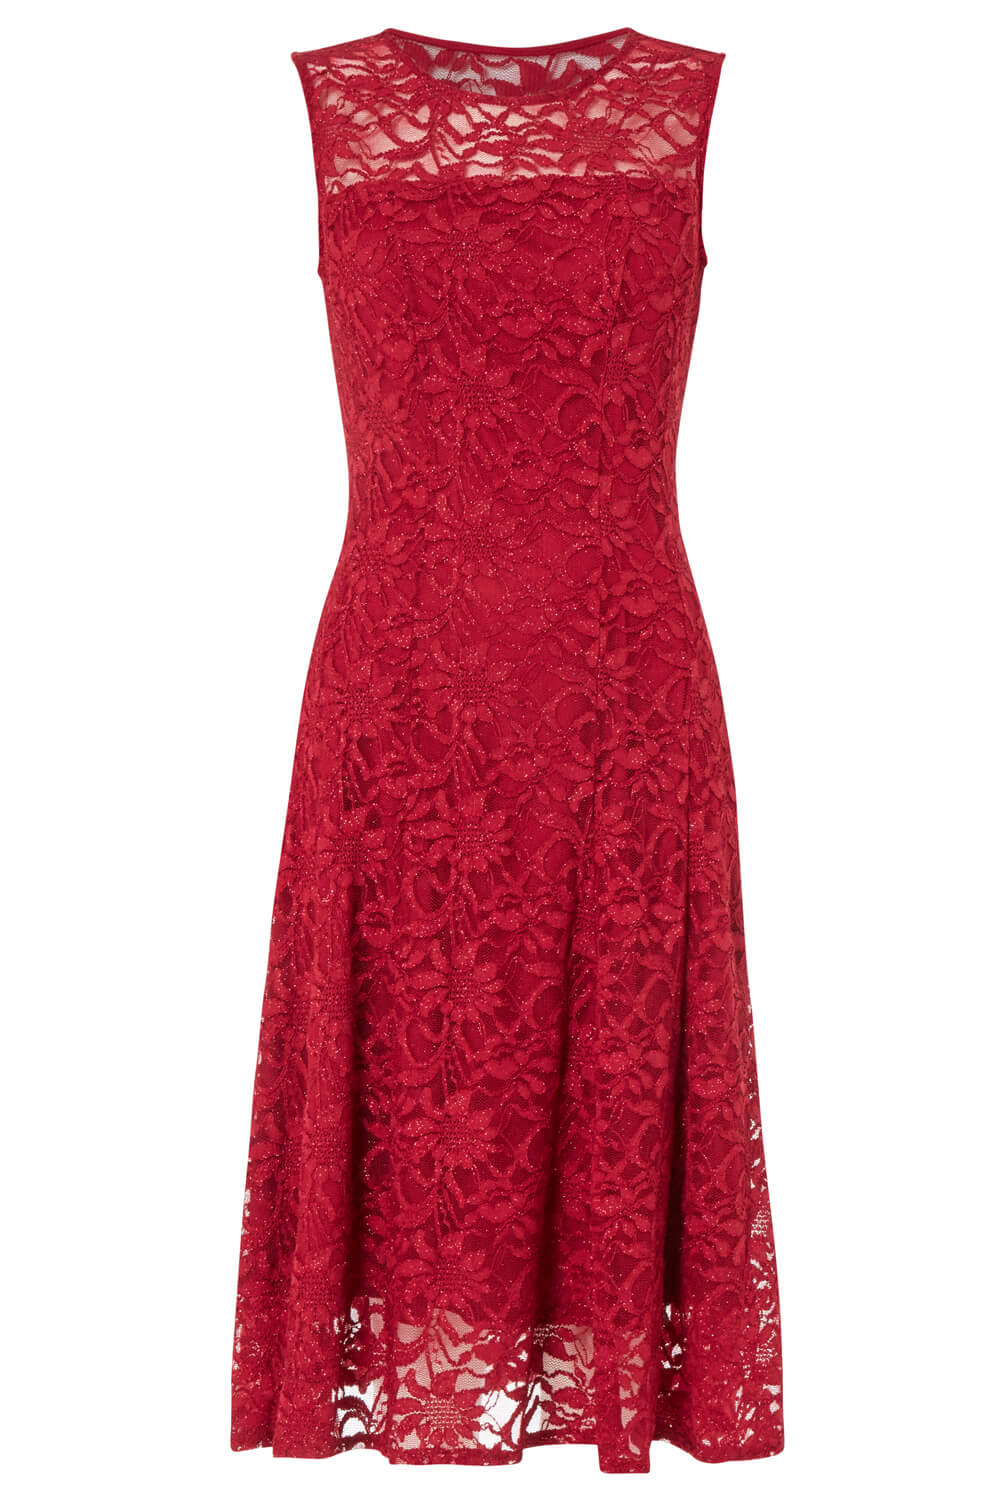 Red Glitter Lace Fit and Flare Dress , Image 5 of 5